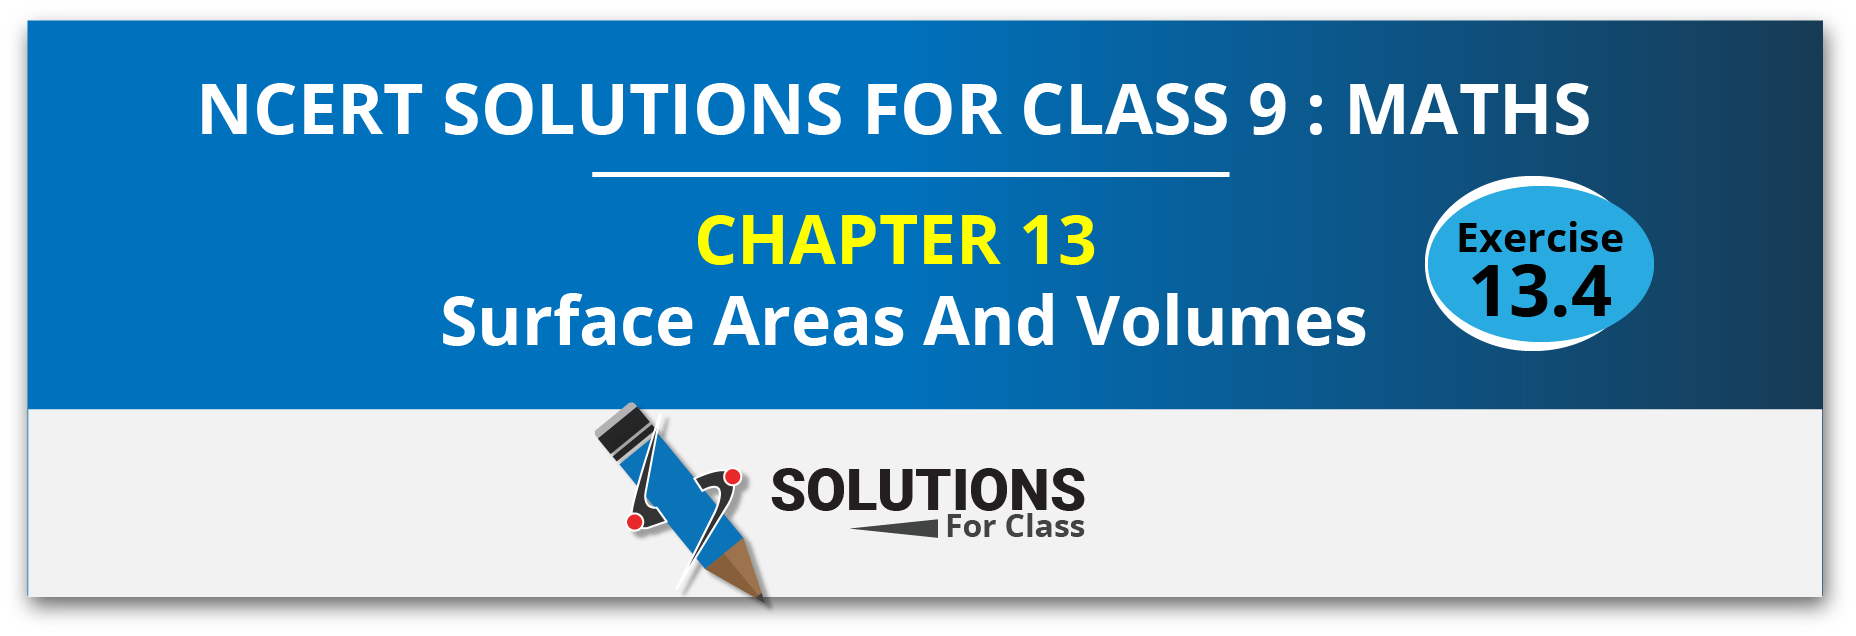 NCERT Solution For Class 9, Maths, Chapter 13, Surface Areas And Volumes, Exercise 13.4